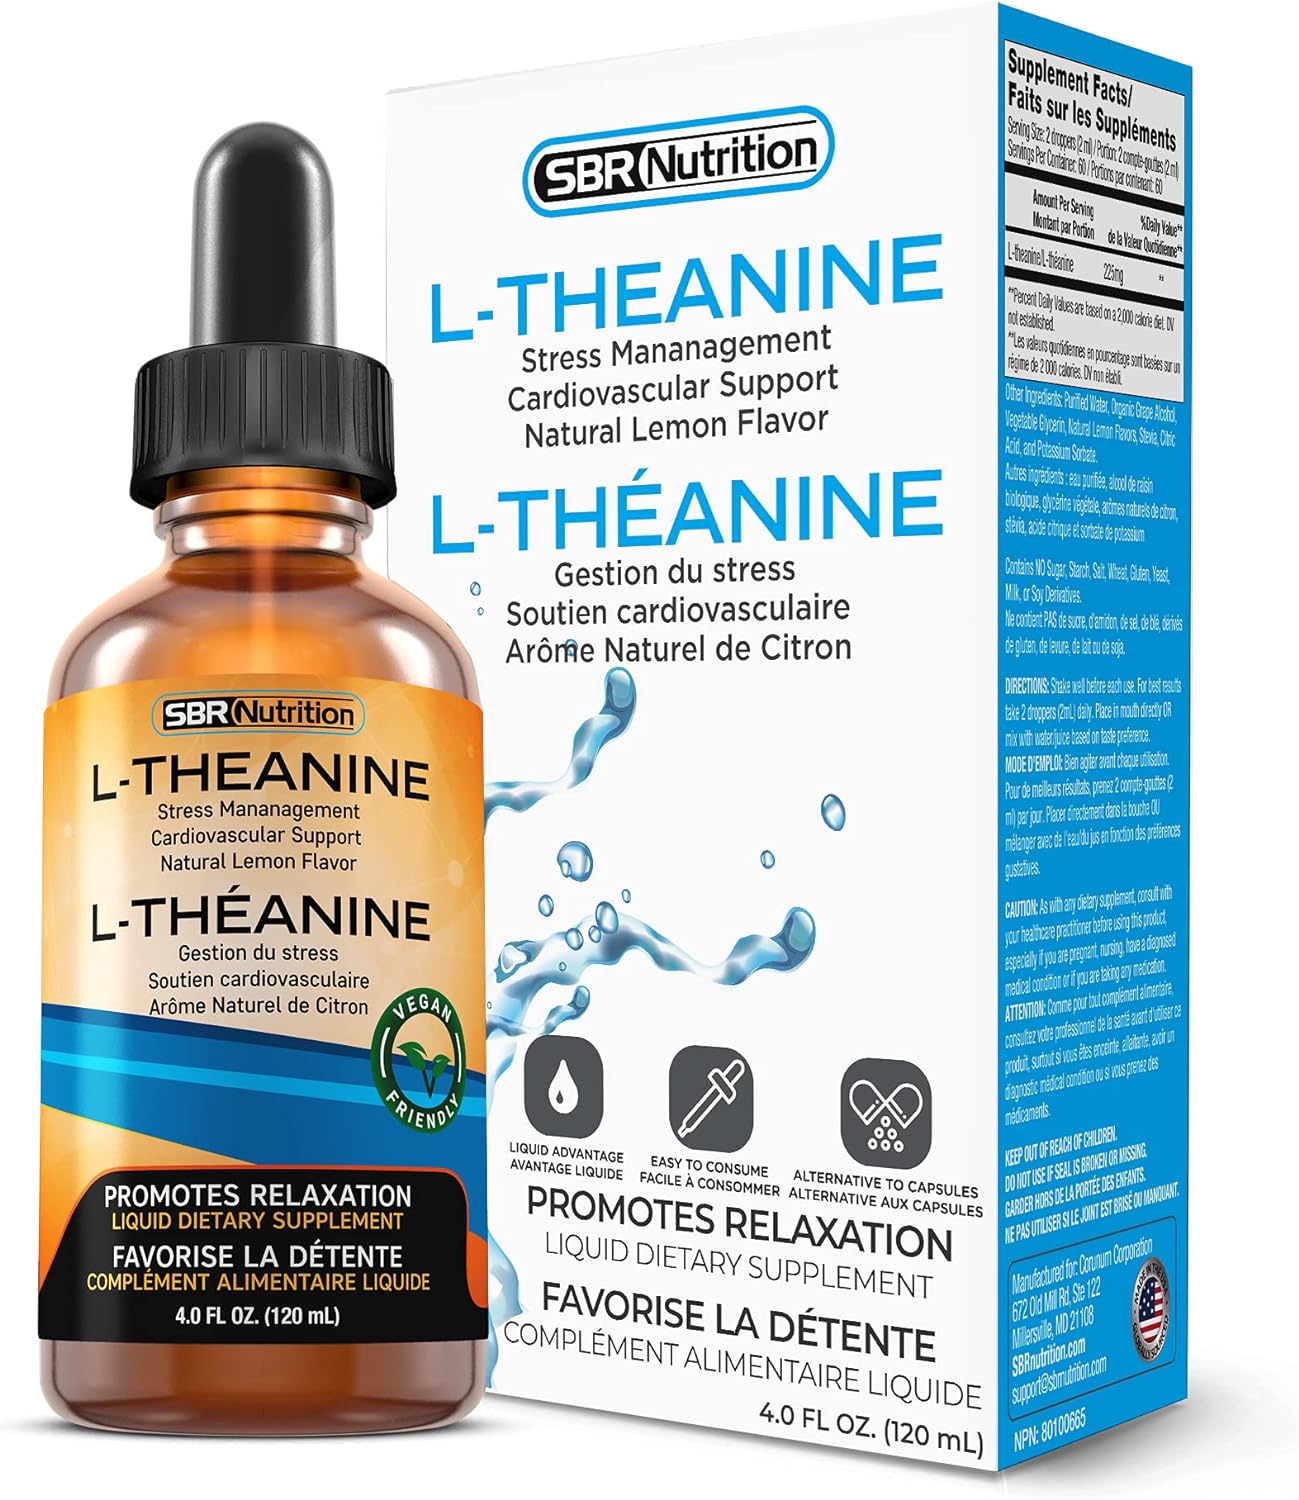 MAX Absorption Liquid L-Theanine Drops | All Natural, Vegan, Alcohol Free, Non-GMO | for Stress Relief, Relaxation, Focus Without Drowsiness | Synergistic with Coffee or Caffeine